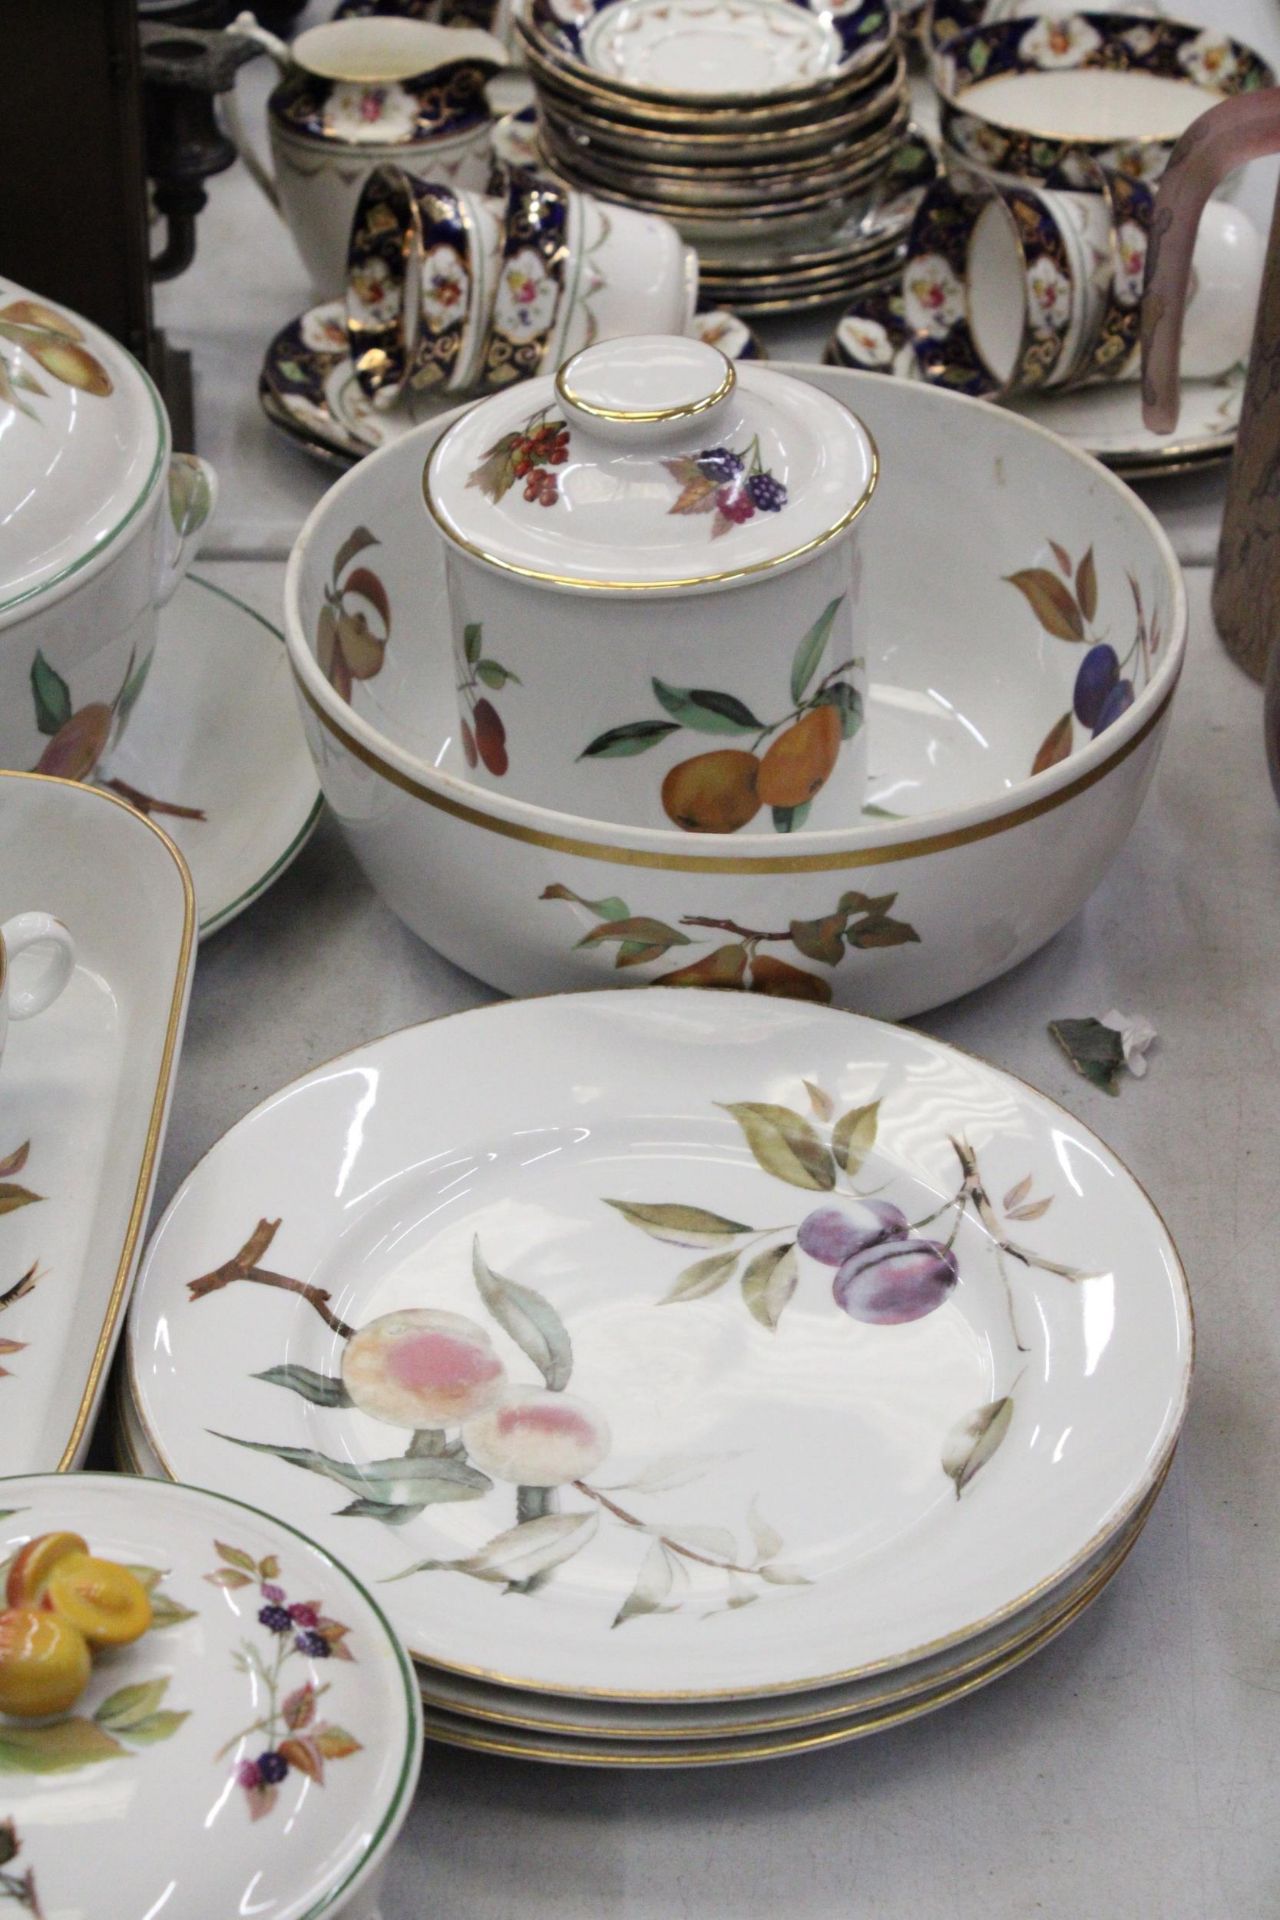 A QUANTITY OF ROYAL WORCESTER WARE TO INCLUDE PLATES, DISHES, PRESERVES JAR ETC - Image 2 of 7